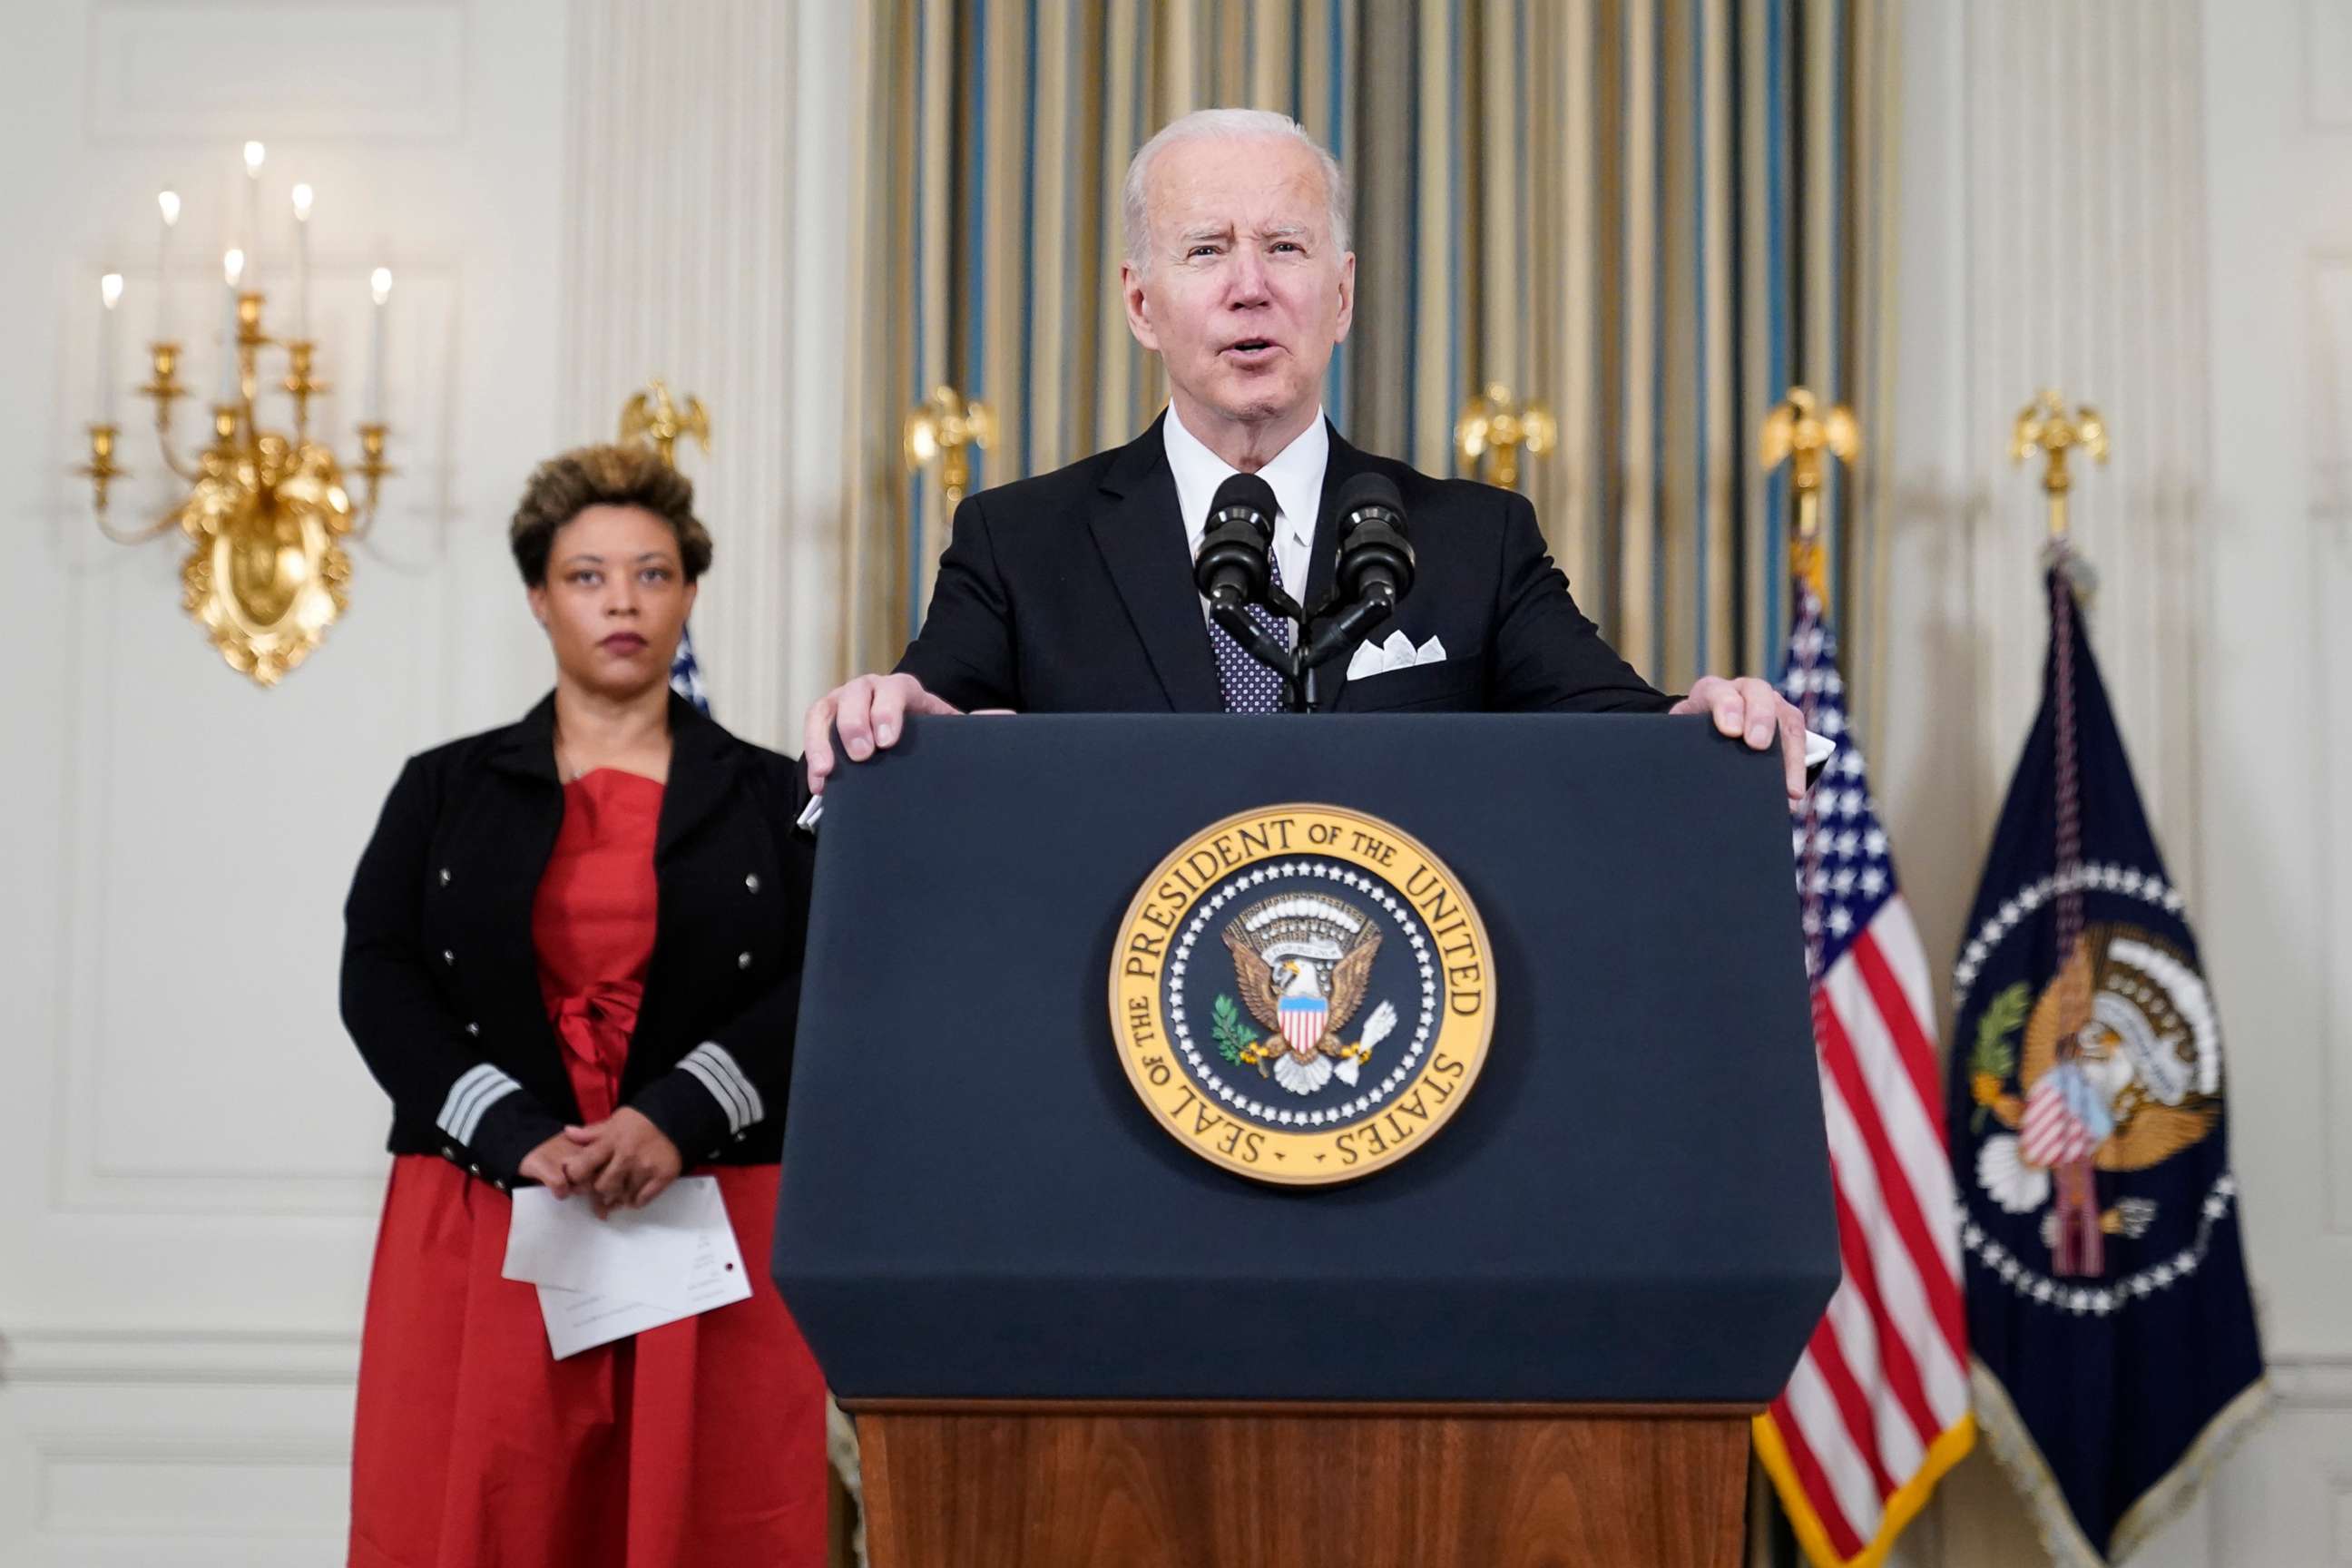 PHOTO: President Joe Biden speaks about his proposed budget for fiscal year 2023 in the State Dining Room of the White House, Monday, March 28, 2022, in Washington, D.C., as Office of Management and Budget acting director Shalanda Young listens.